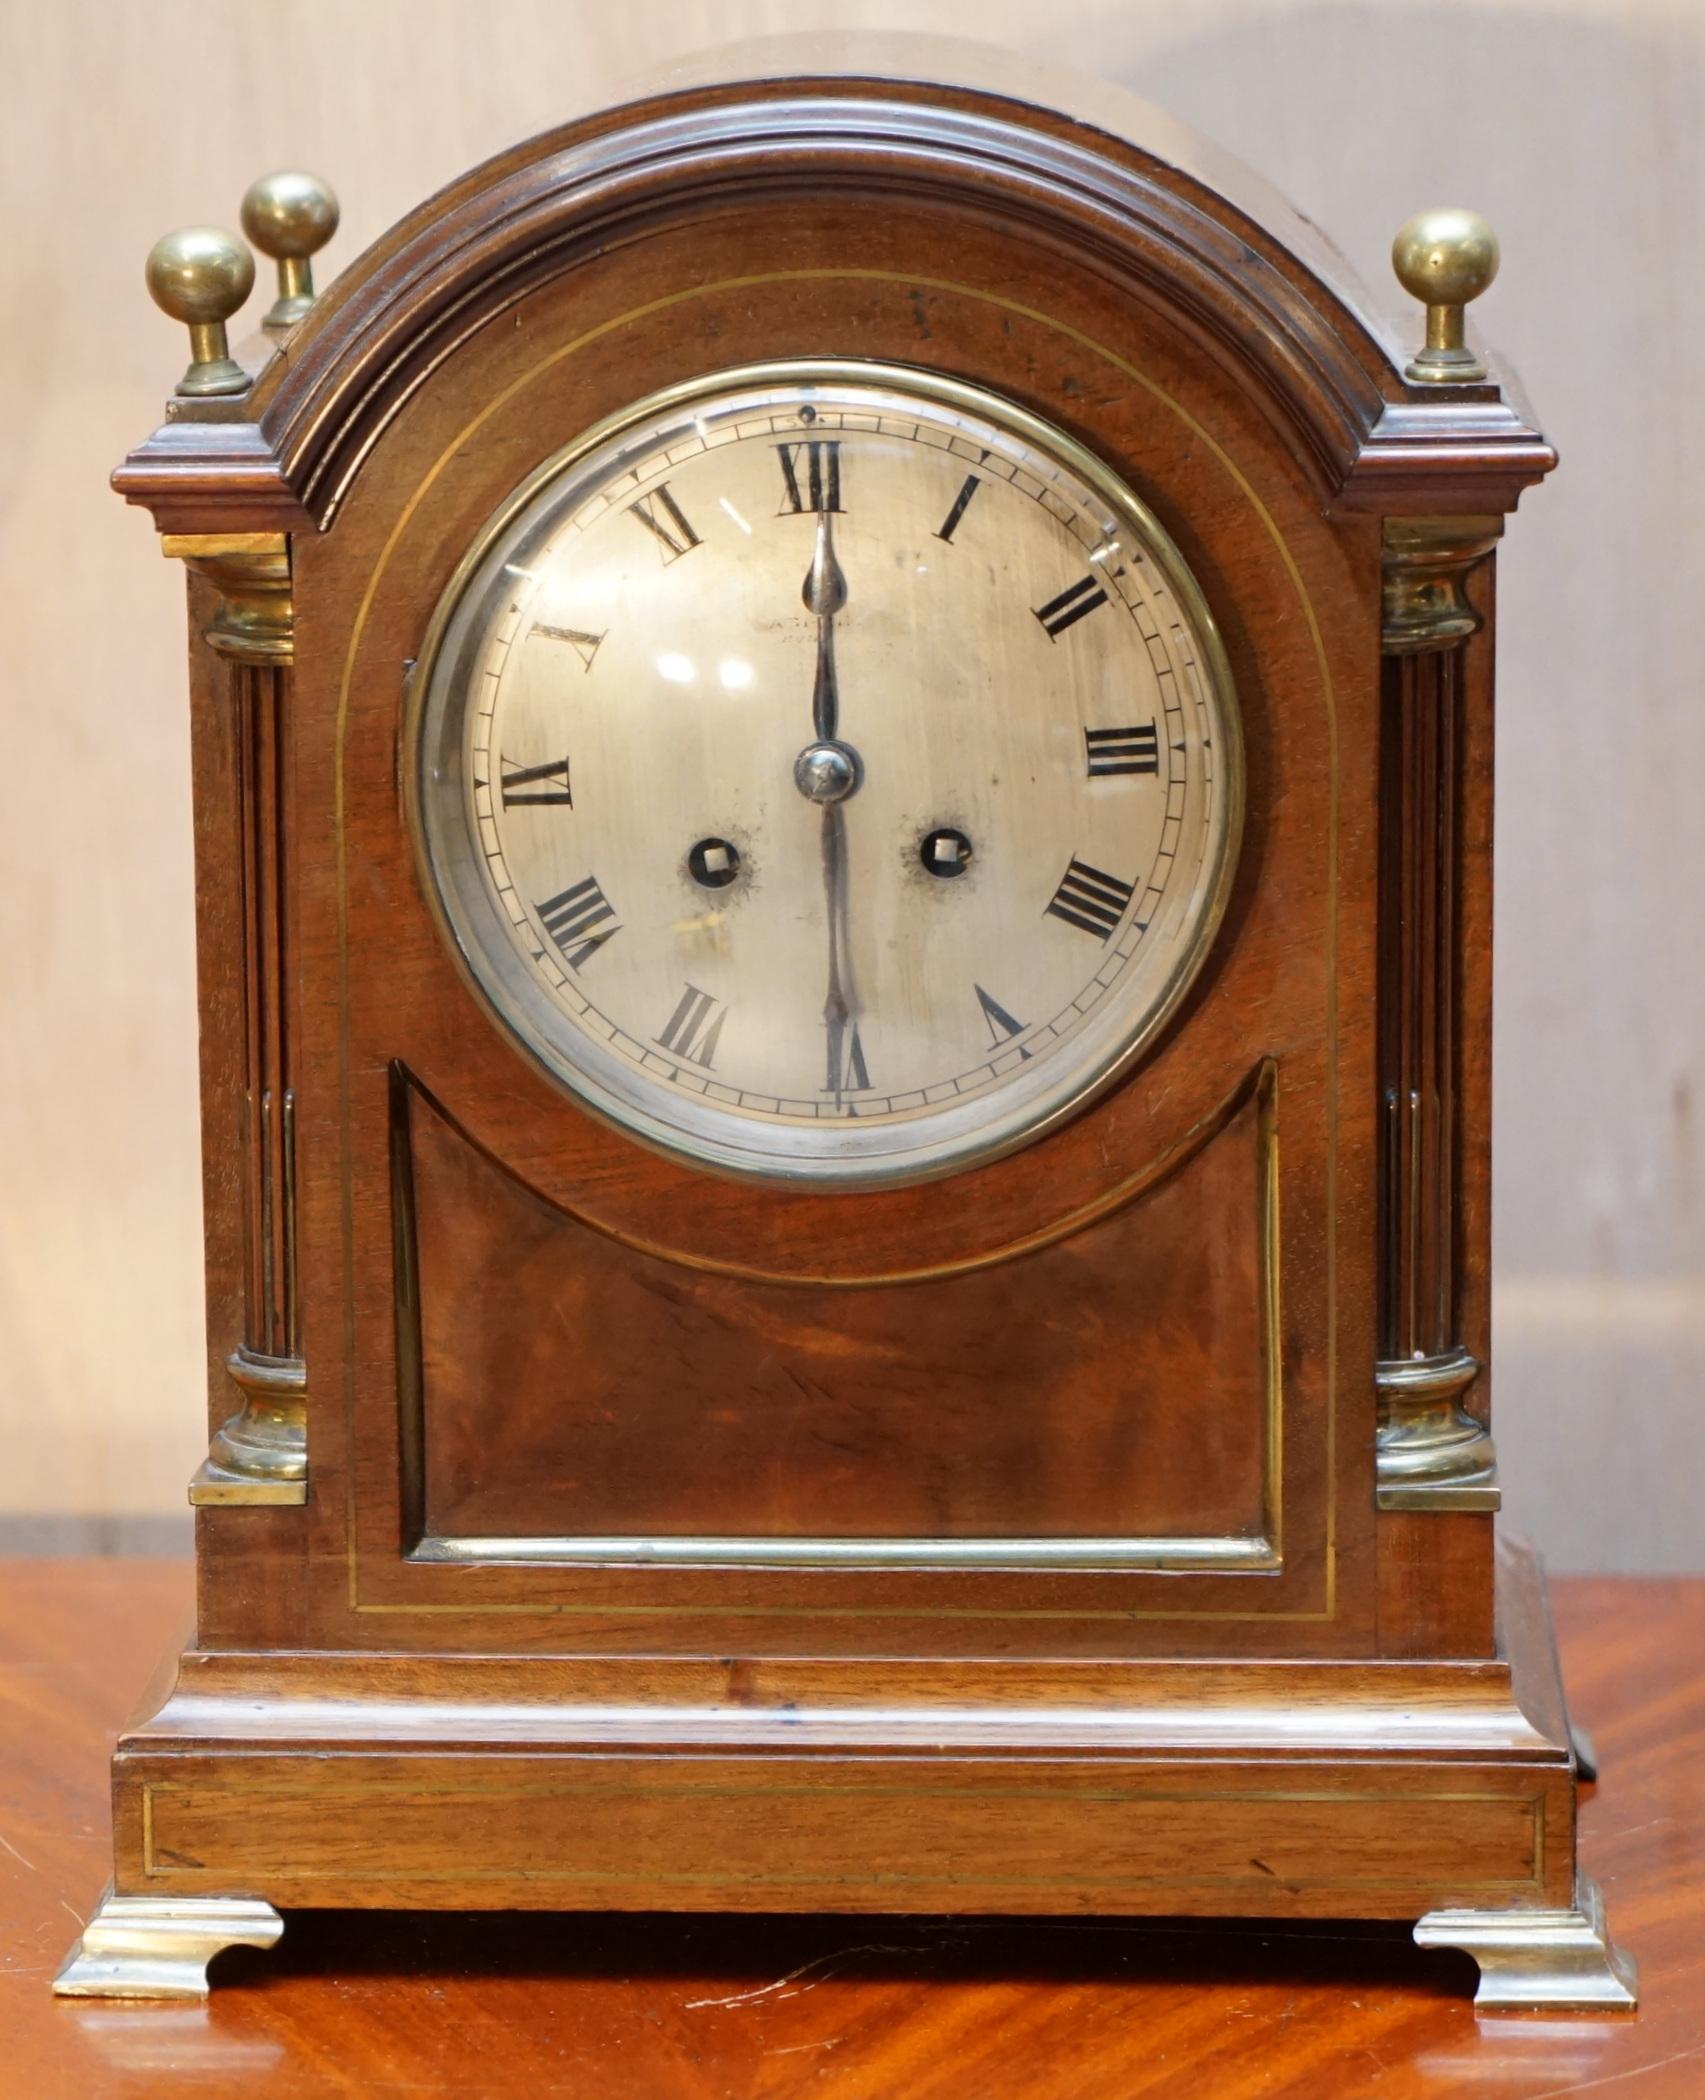 We are delighted to offer for sale this lovely Asprey Mantle clock circa 1860

A very good looking well made and decorative antique clock, I bought this as a project as there is very little that needs doing to it.

The pendulum is missing, one